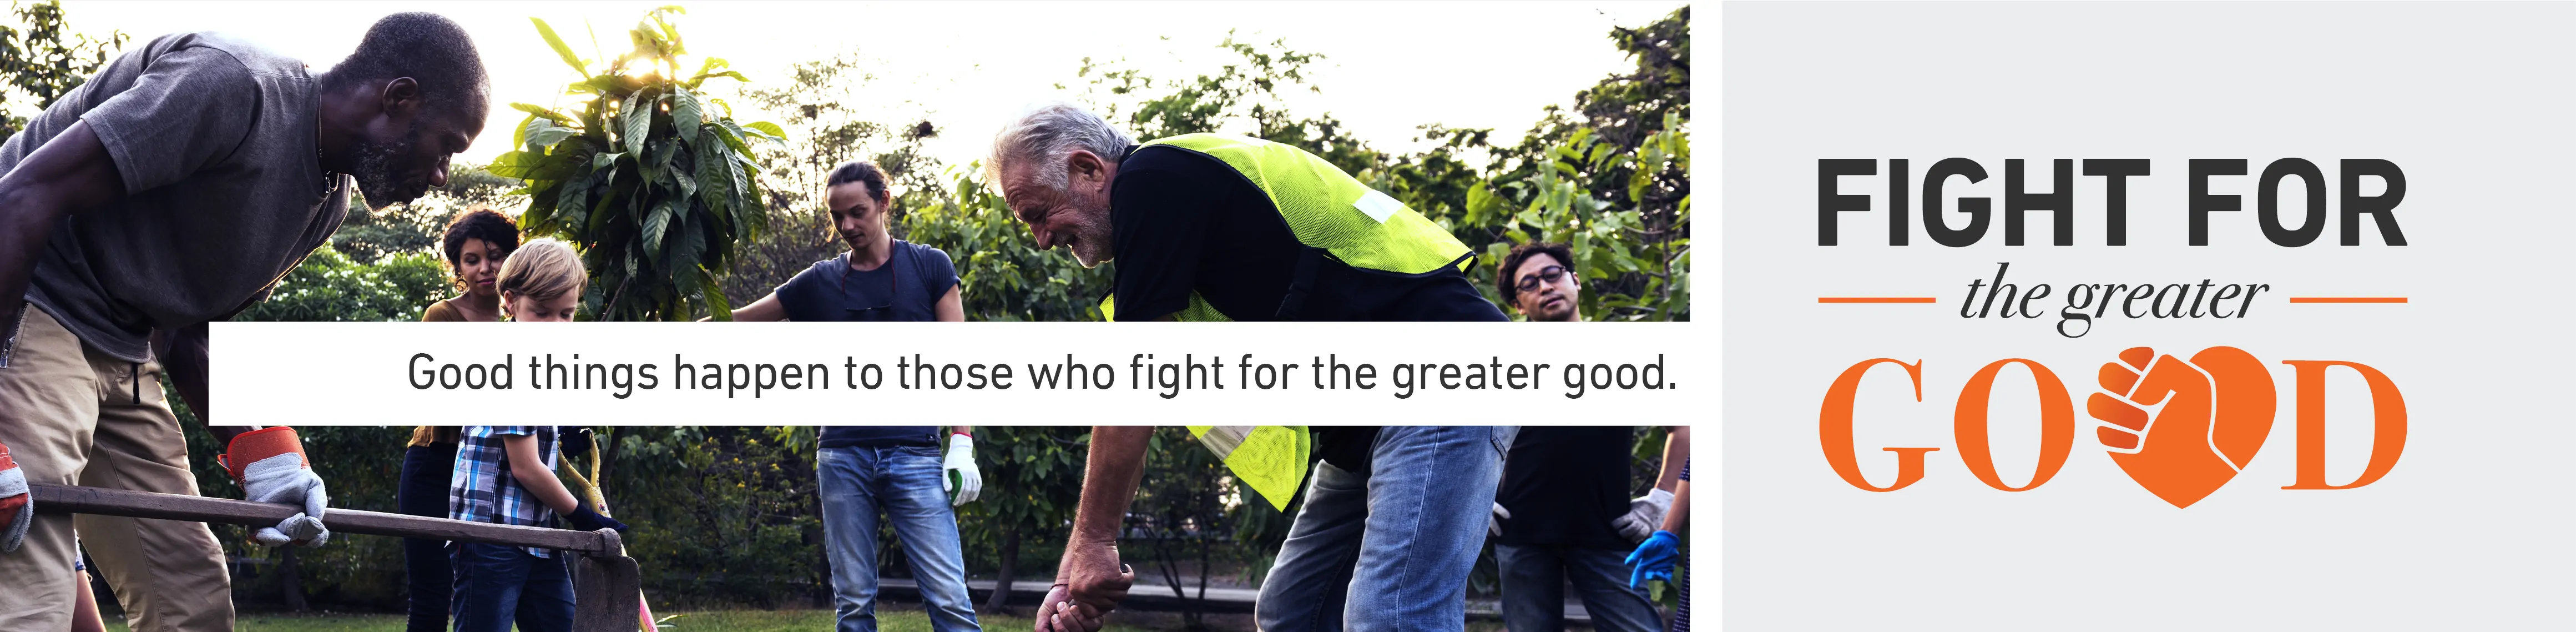 FIGHT FOR THE GREATER GOOD - 2018 Q2 Promo FFTGG LandingPageHeader2